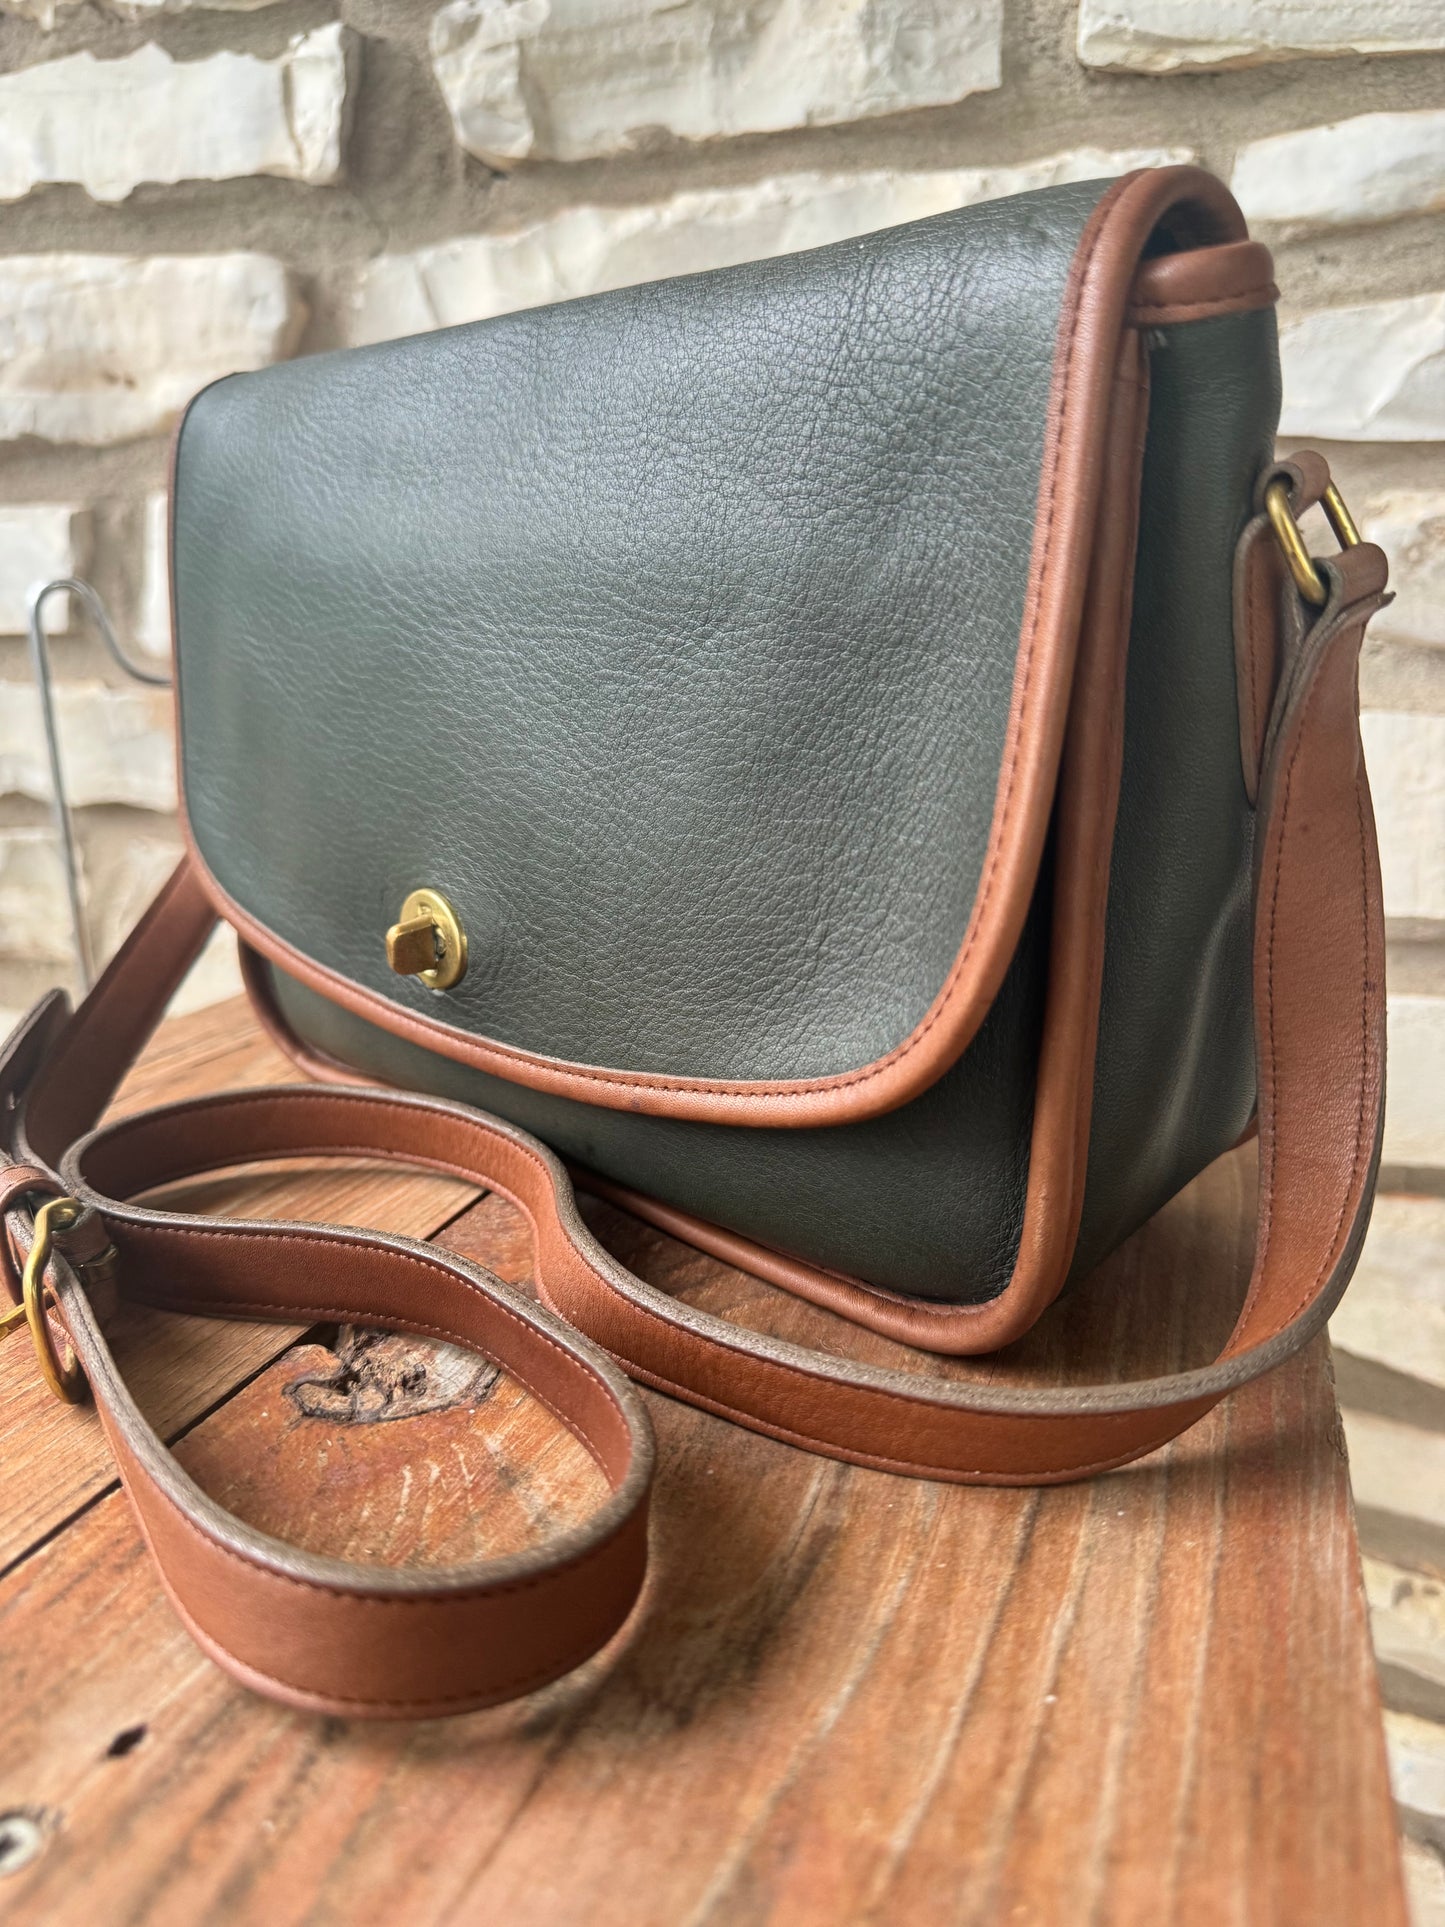 Vintage Coach Spectator City Bag- Forest Green & Tabac w/Hangtag